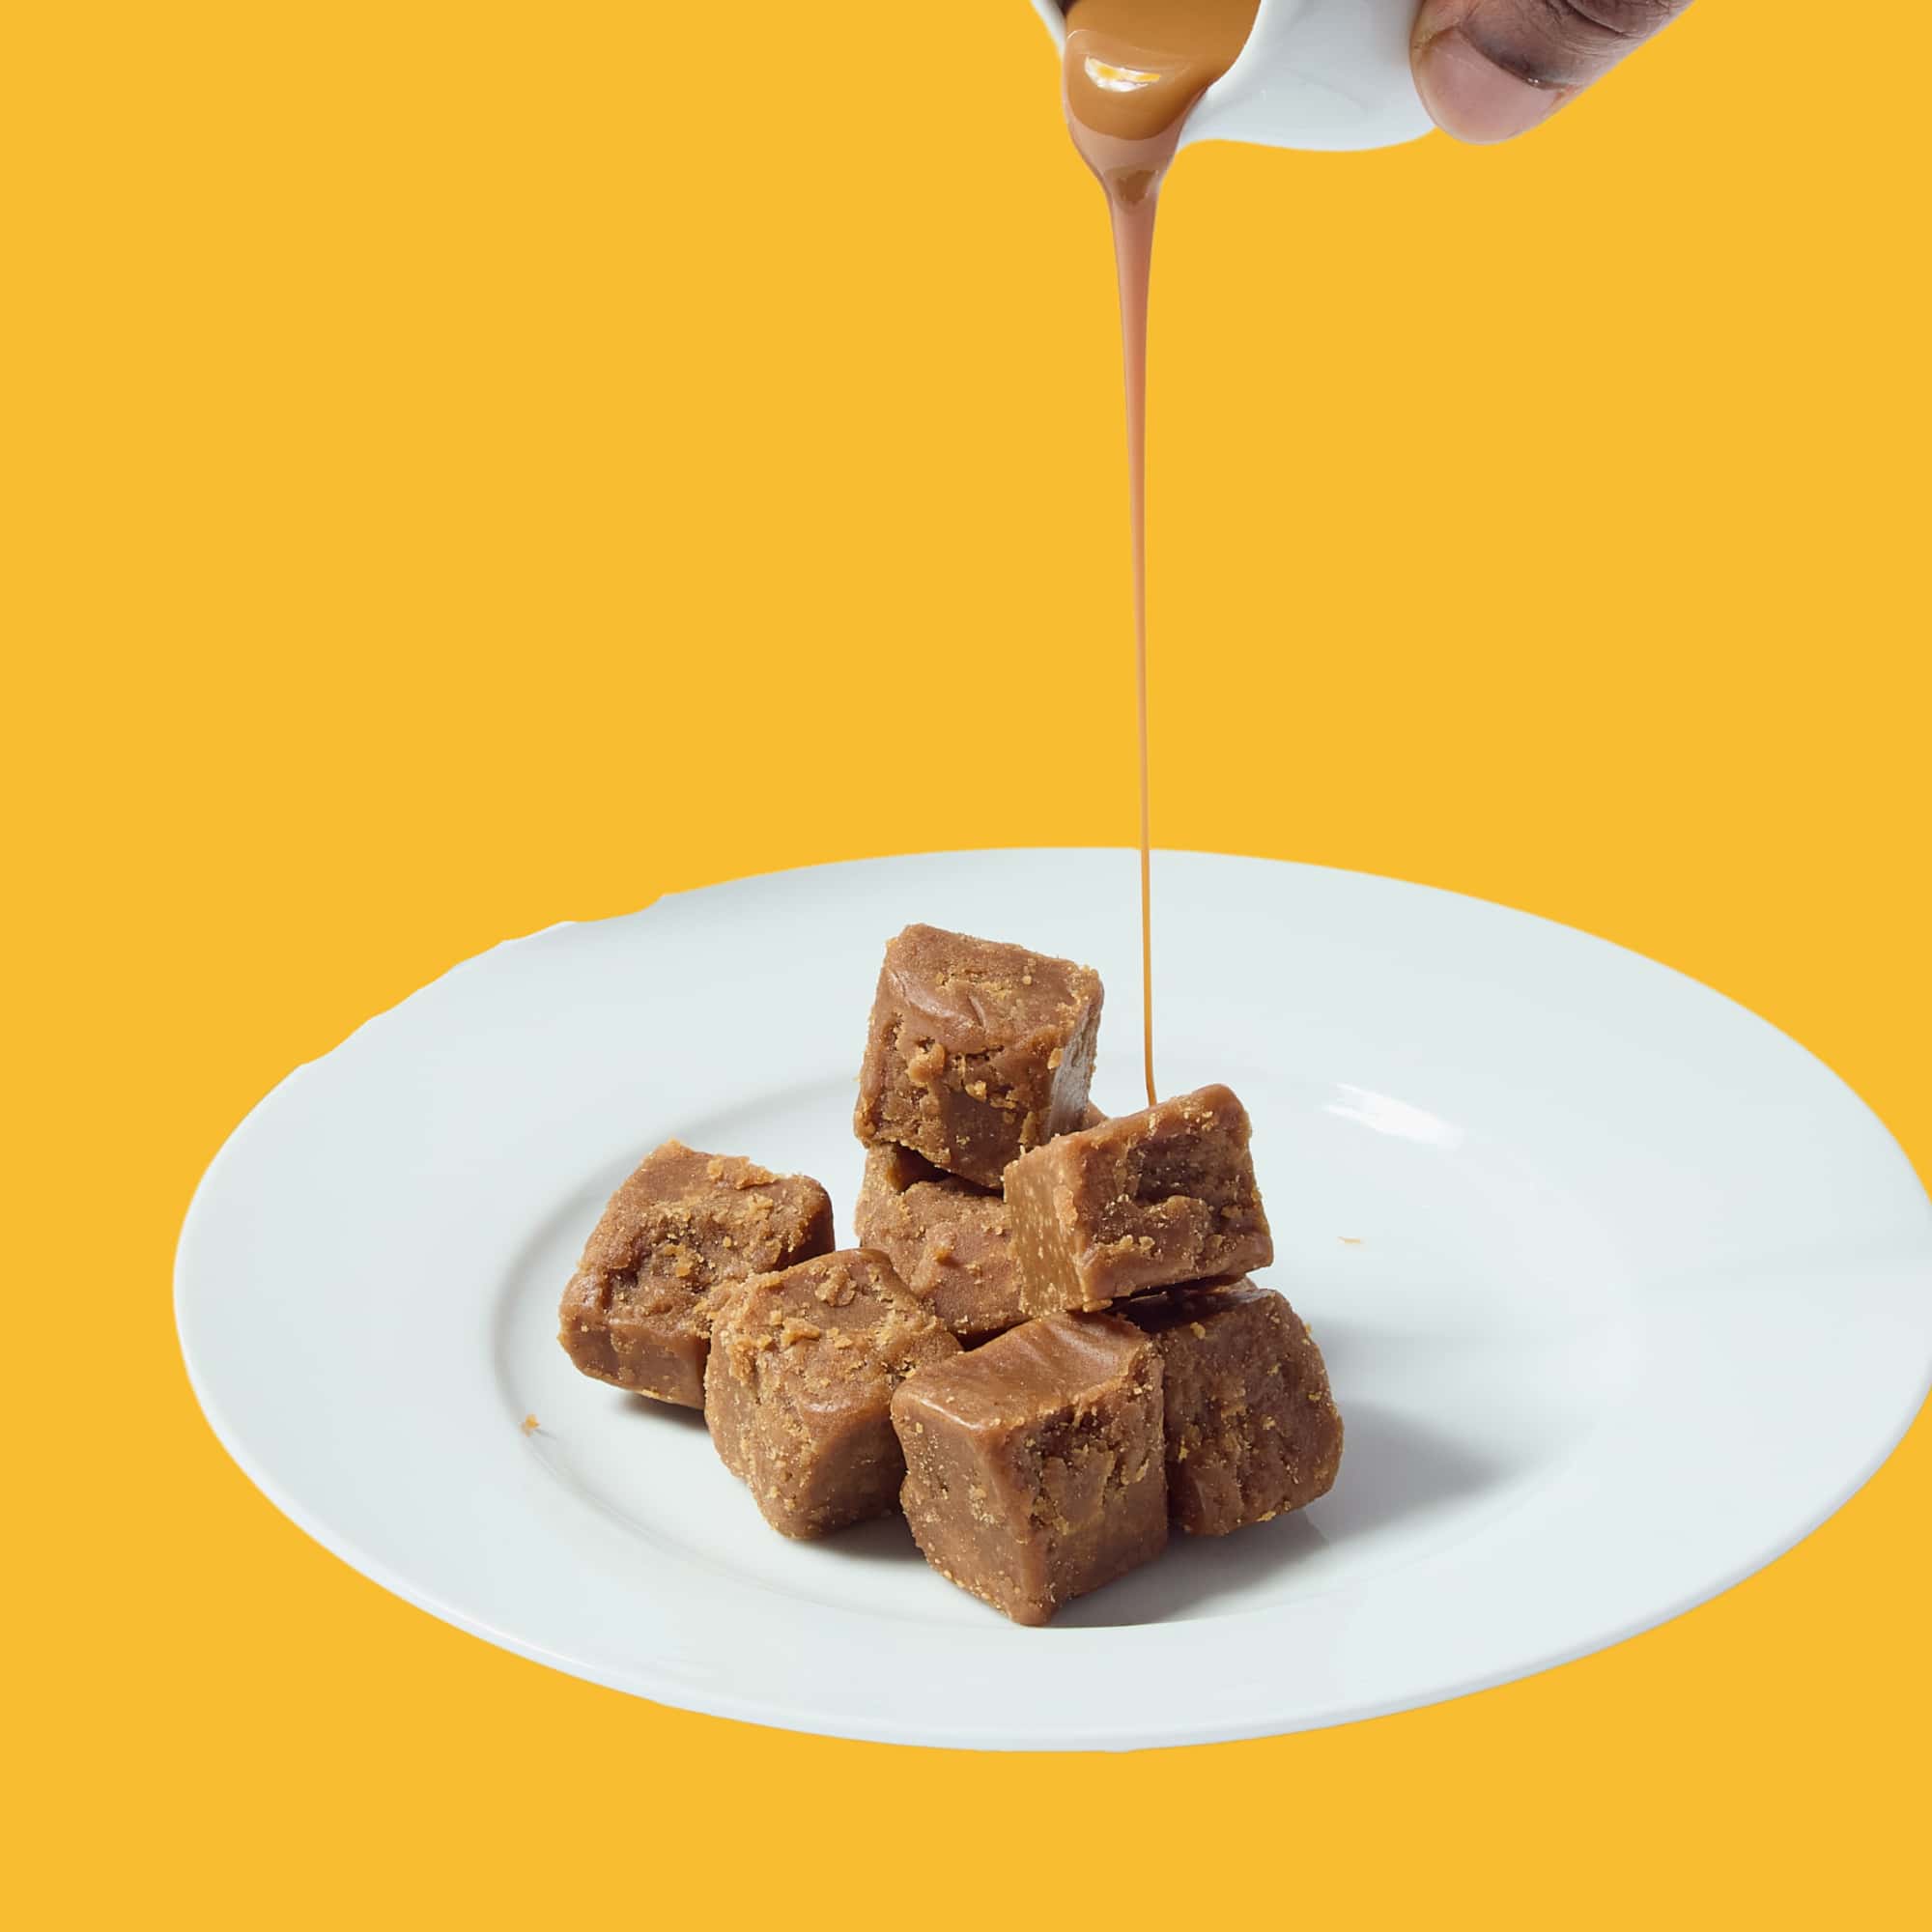 A person is pouring caramel over a plate of fudge.